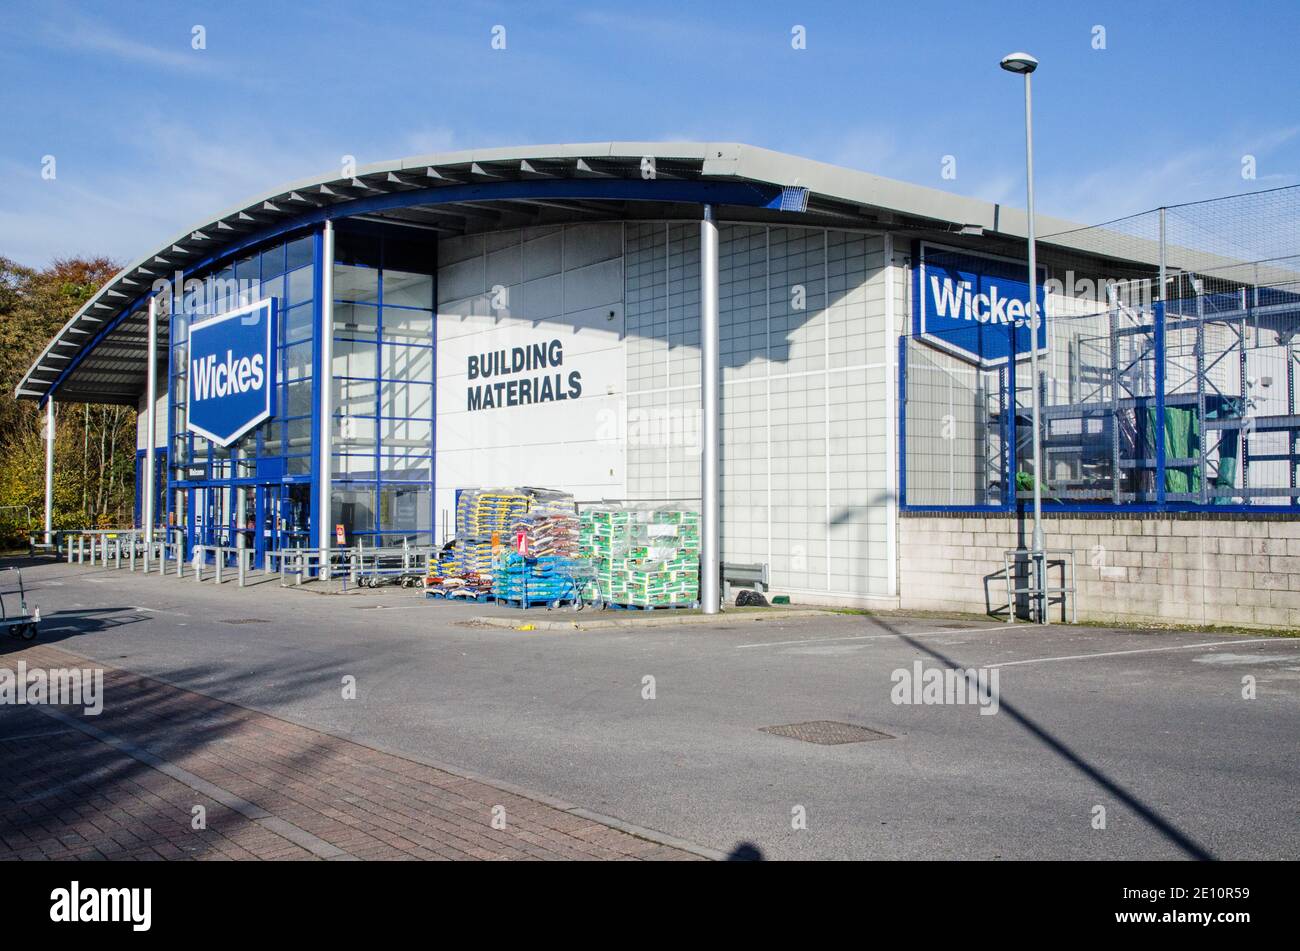 Basingstoke, UK - November 6, 2020: Exterior of a large branch of Wickes building supplies retailer in an out of town shopping area of Basingstoke, Ha Stock Photo